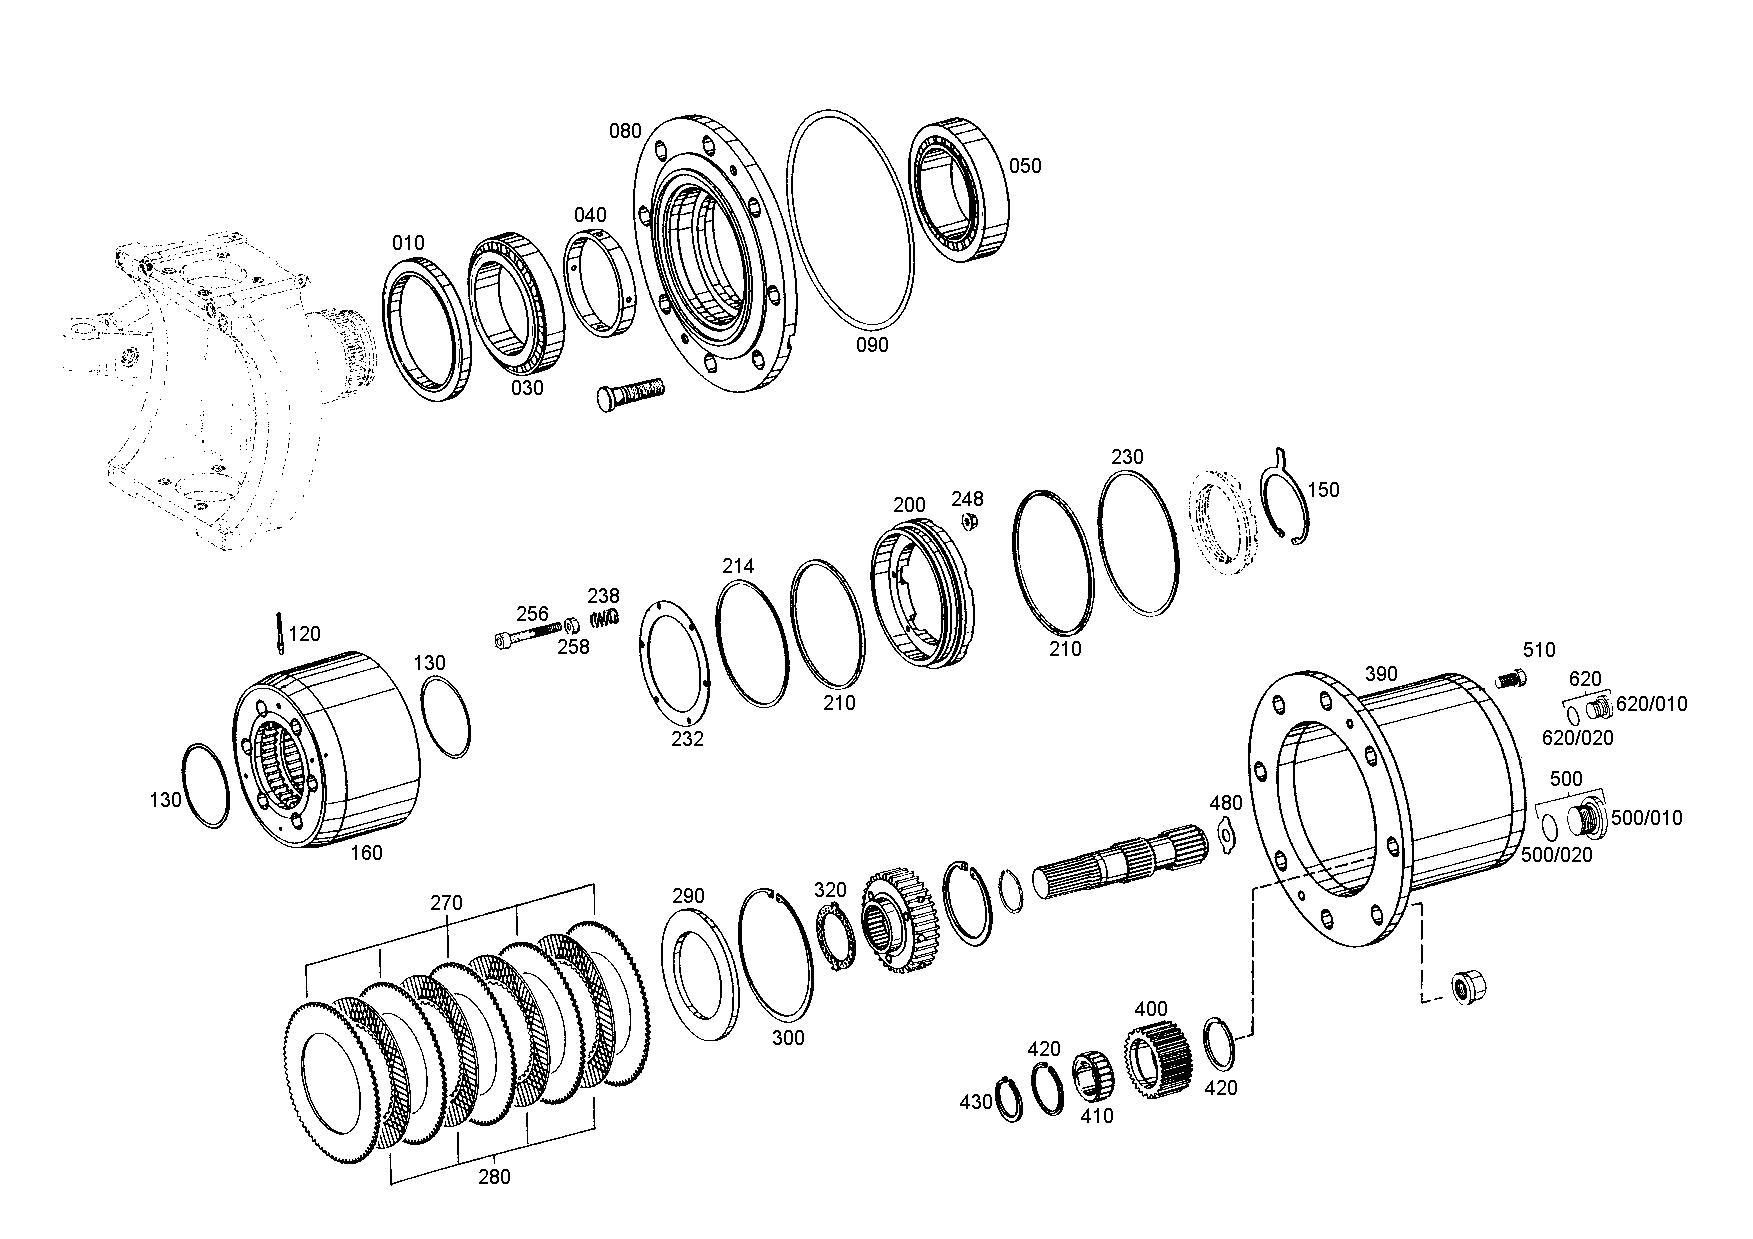 drawing for CATERPILLAR INC. 028793 - RING (figure 5)